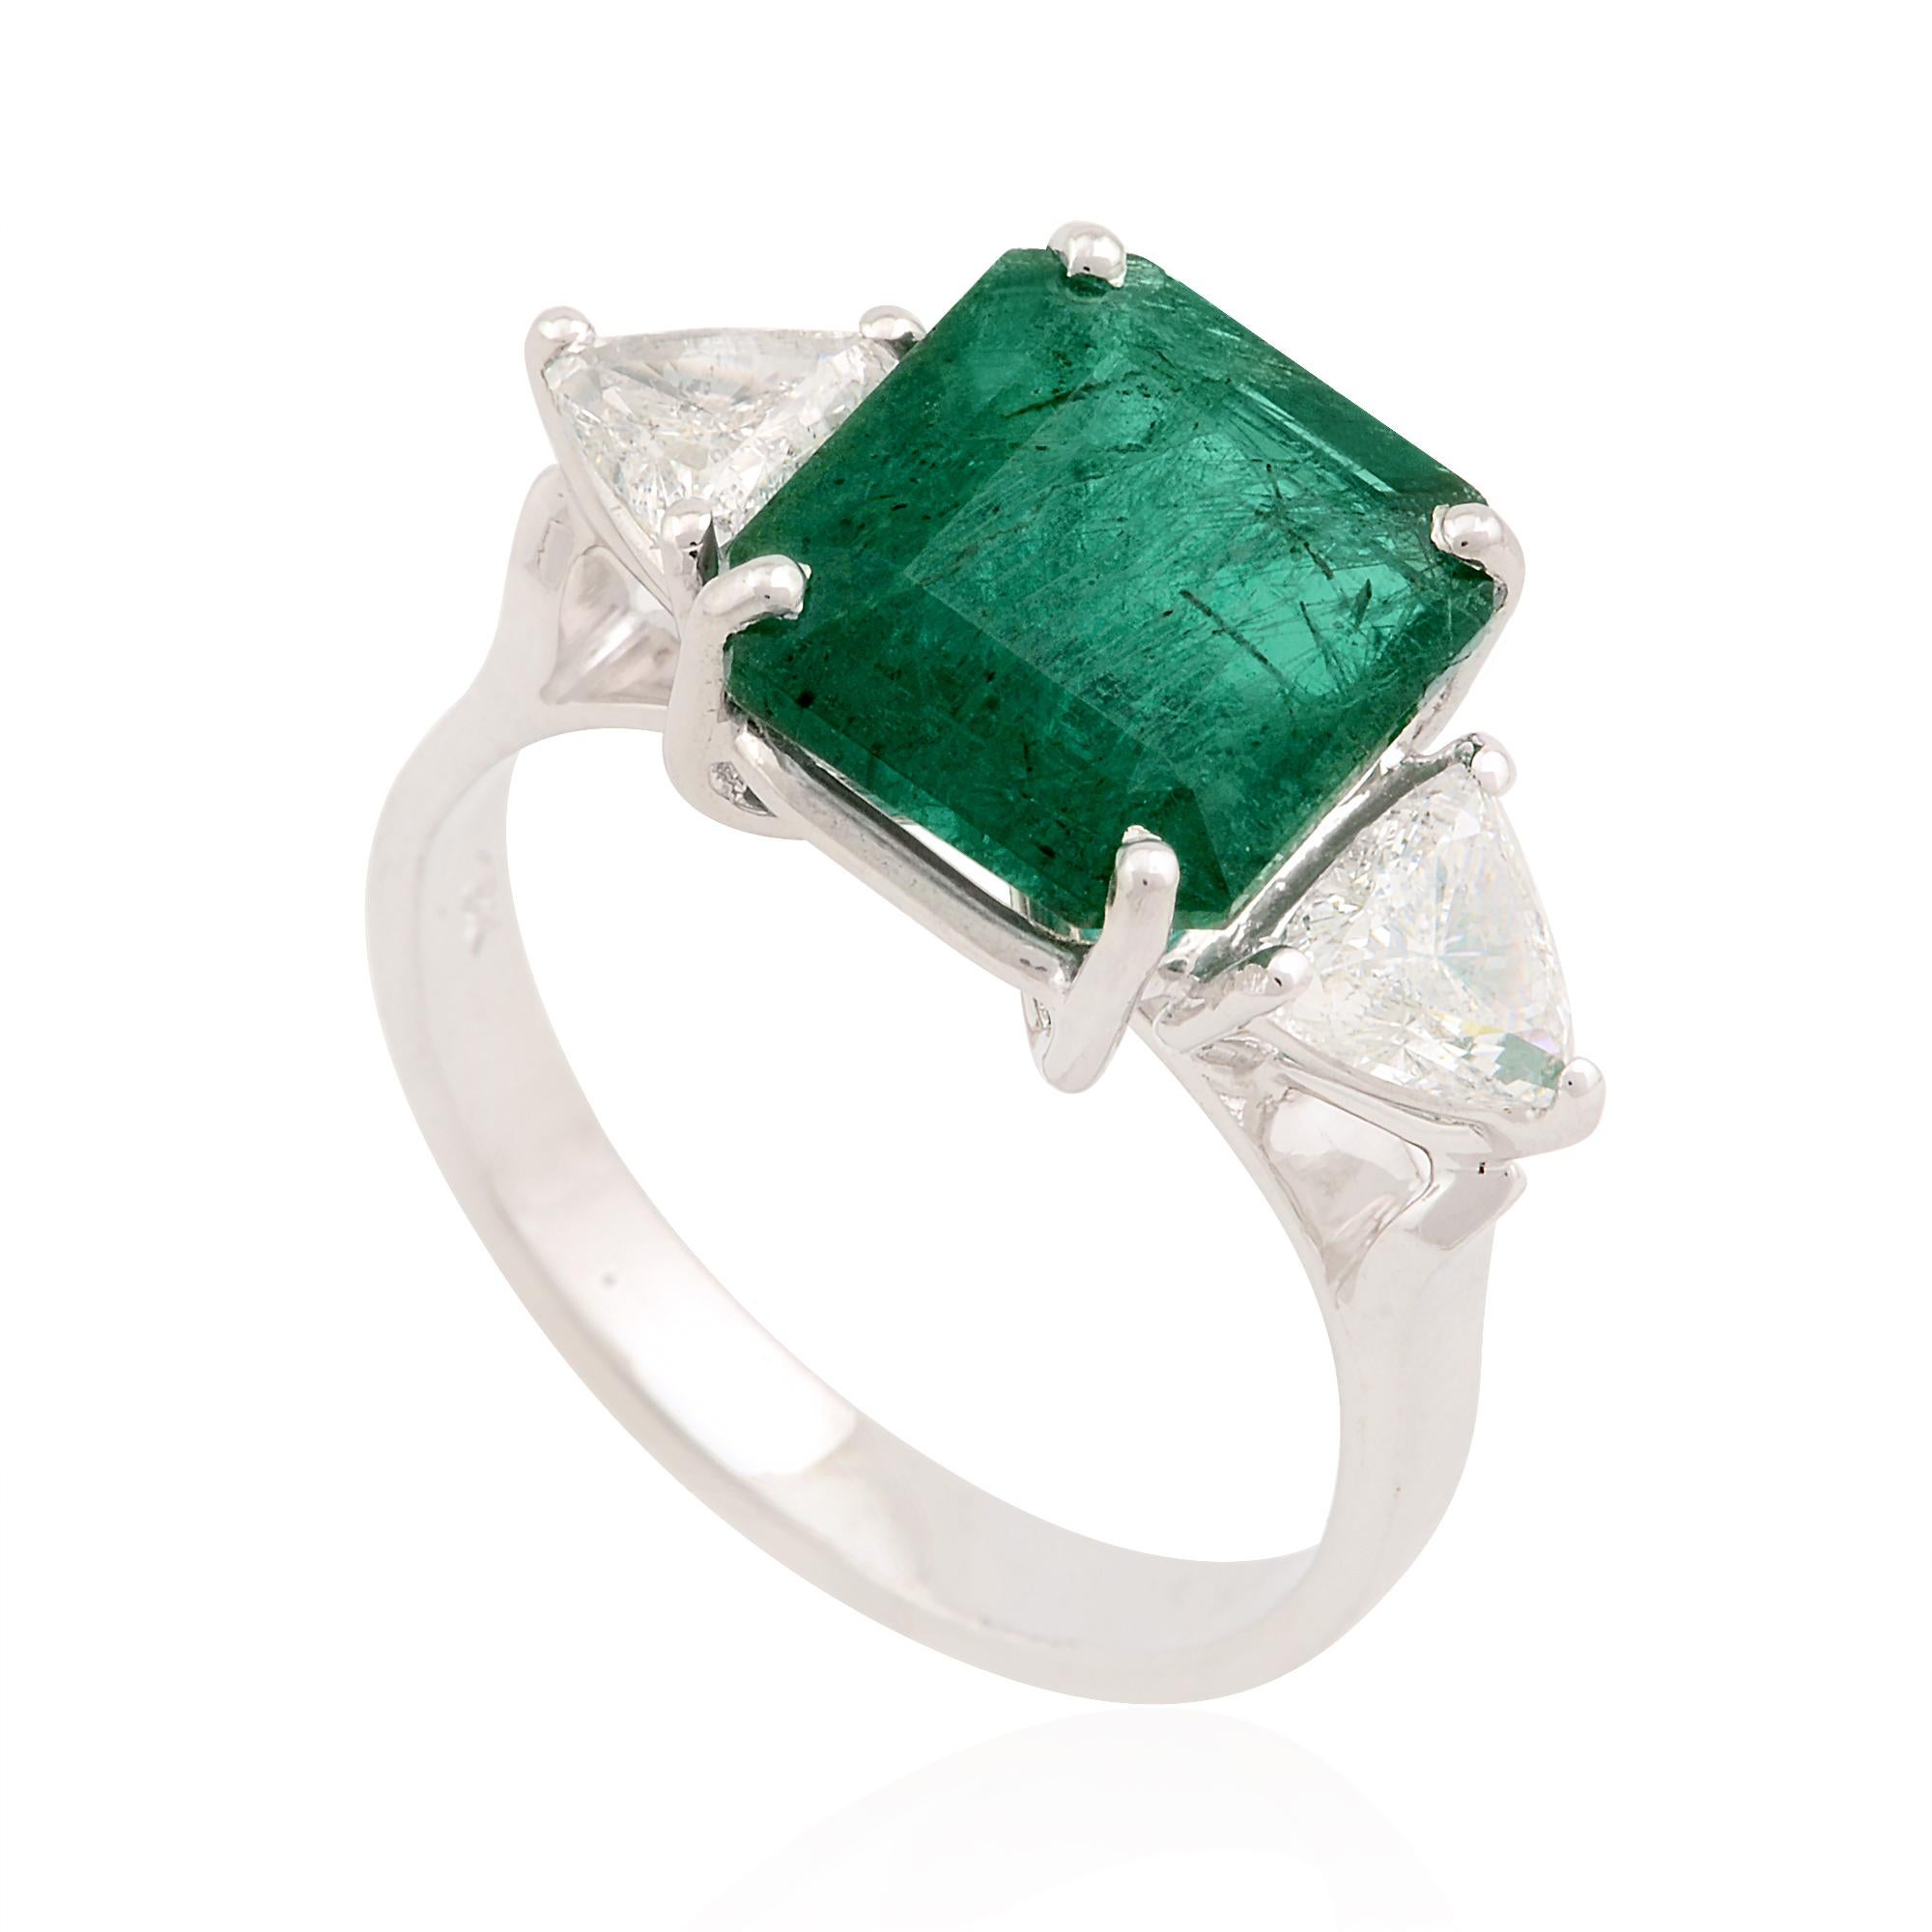 For Sale:  Natural Emerald Gemstone Cocktail Ring Pear Diamond Solid 18k White Gold Jewelry 3